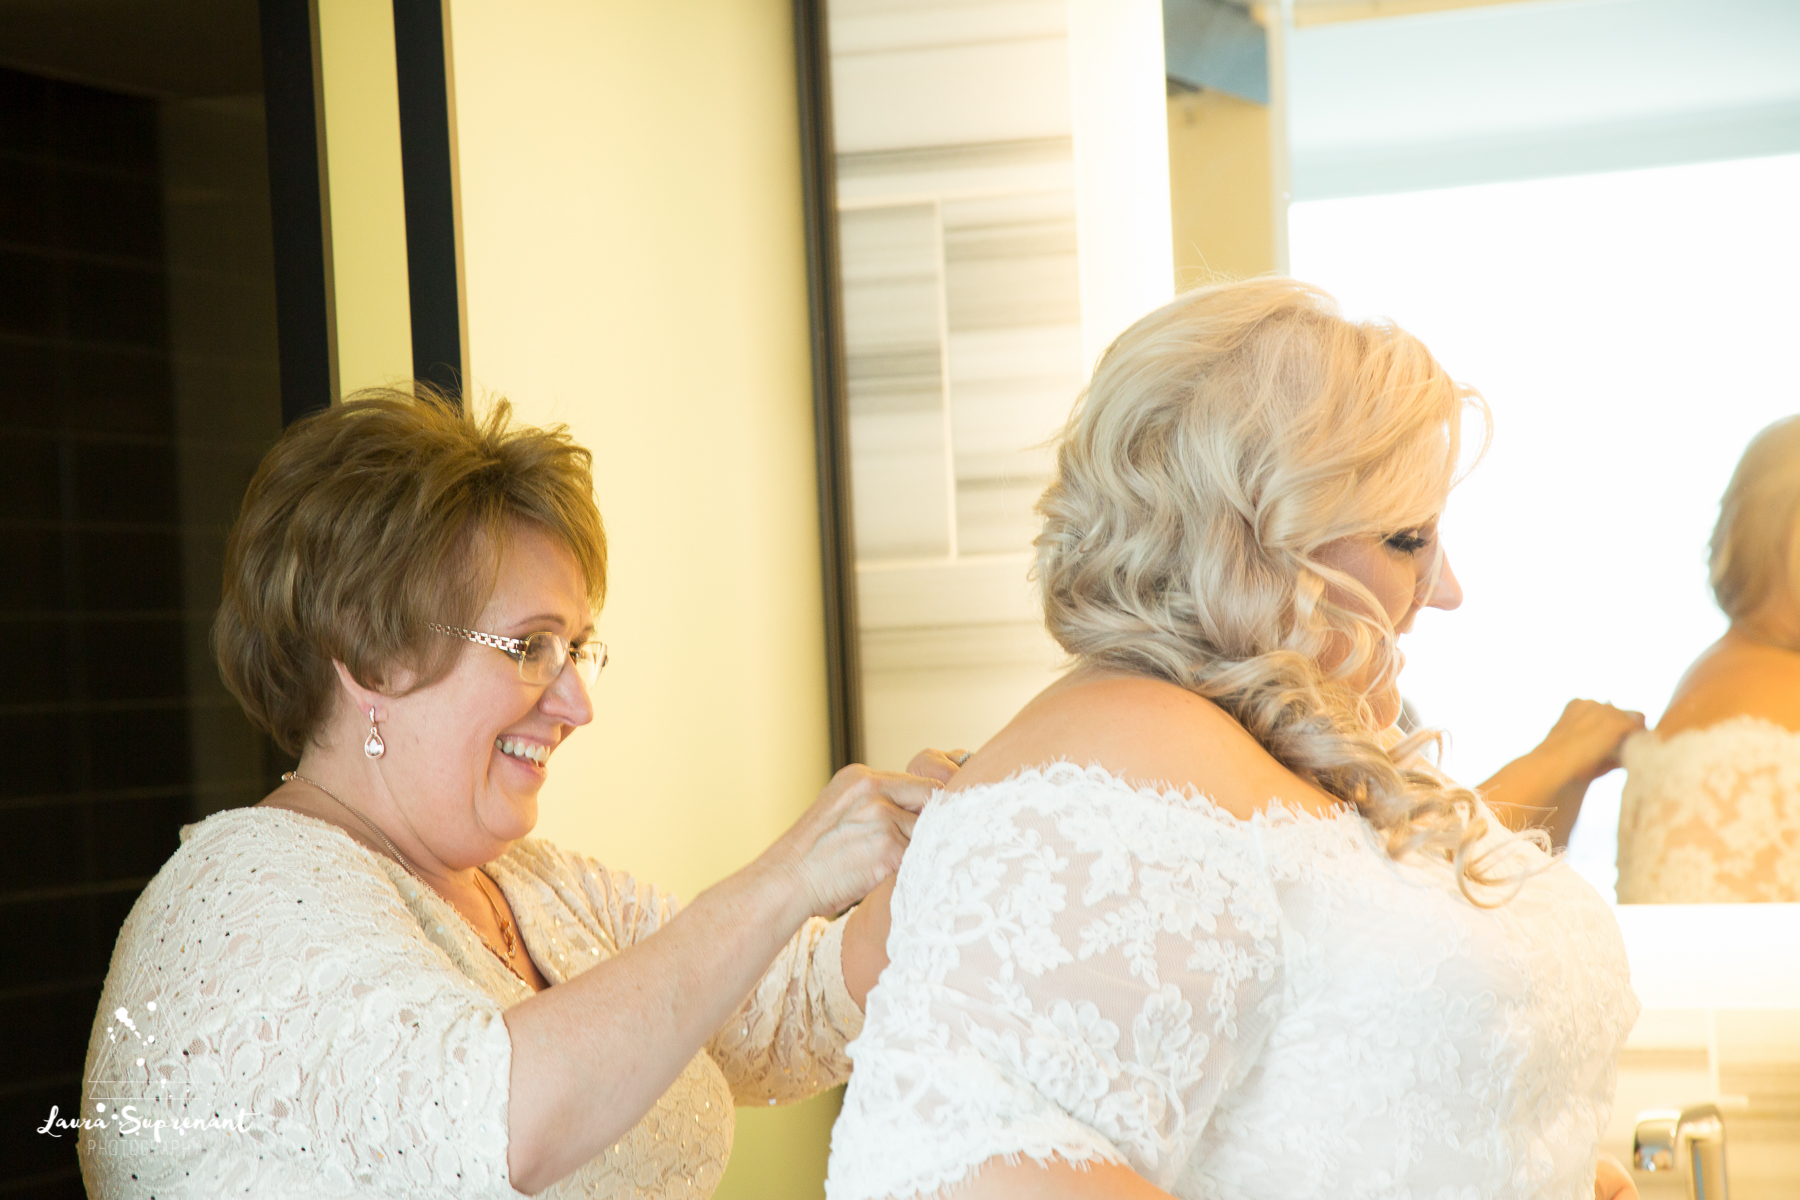 wedding_photography_chicago_wrigley_field_ravenswood_event_center_laura_suprenant (72 of 82).jpg